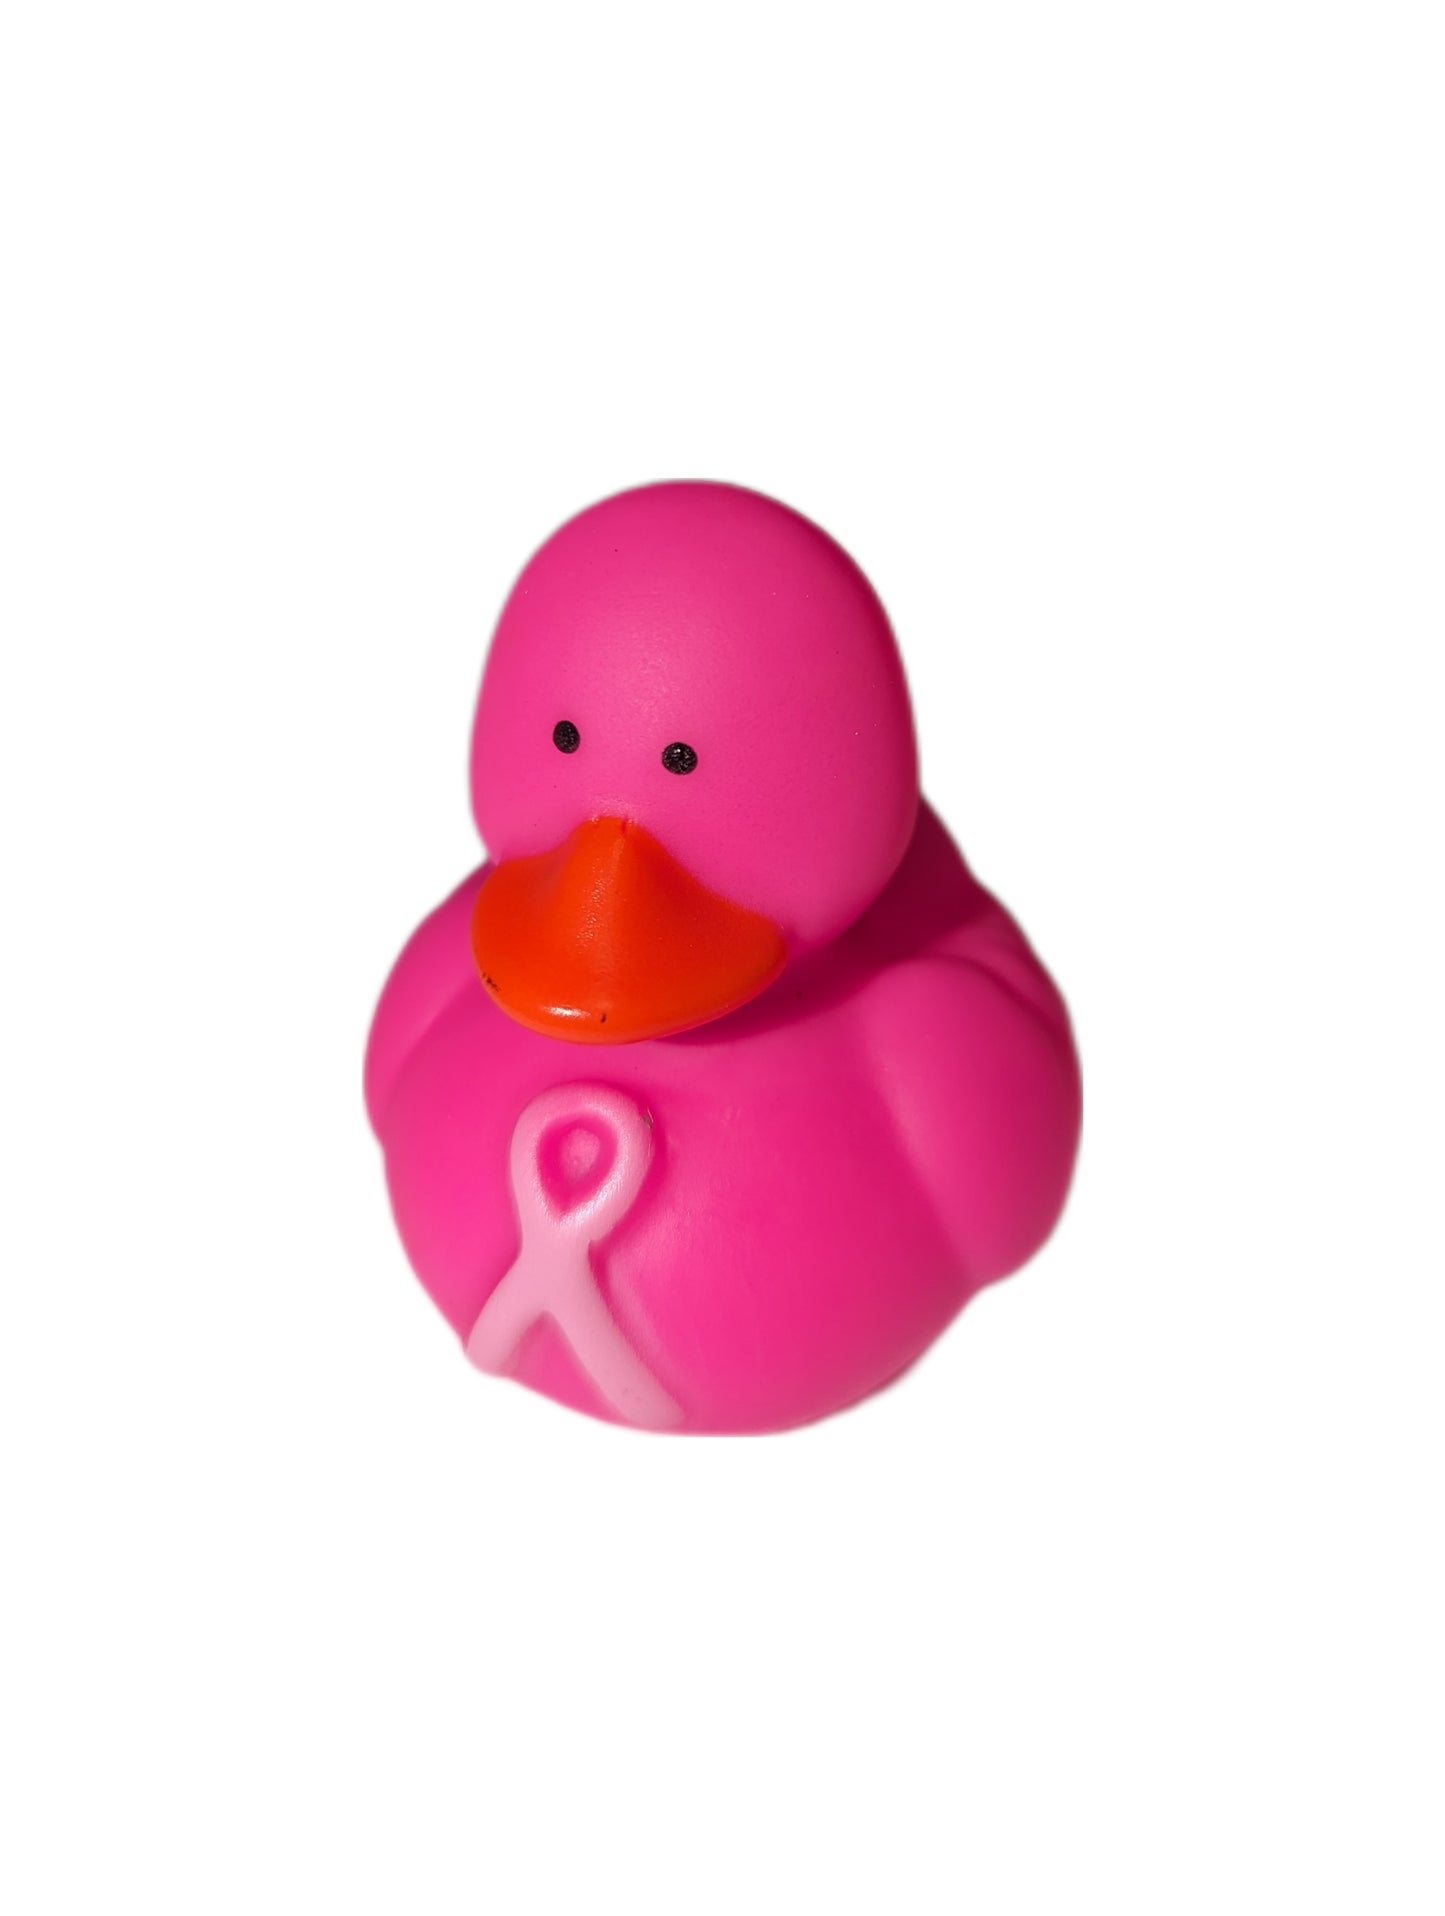 10 Mixed Light Pink and Hot Pink Breast Cancer Awareness Ducks - 2" Rubber Ducks